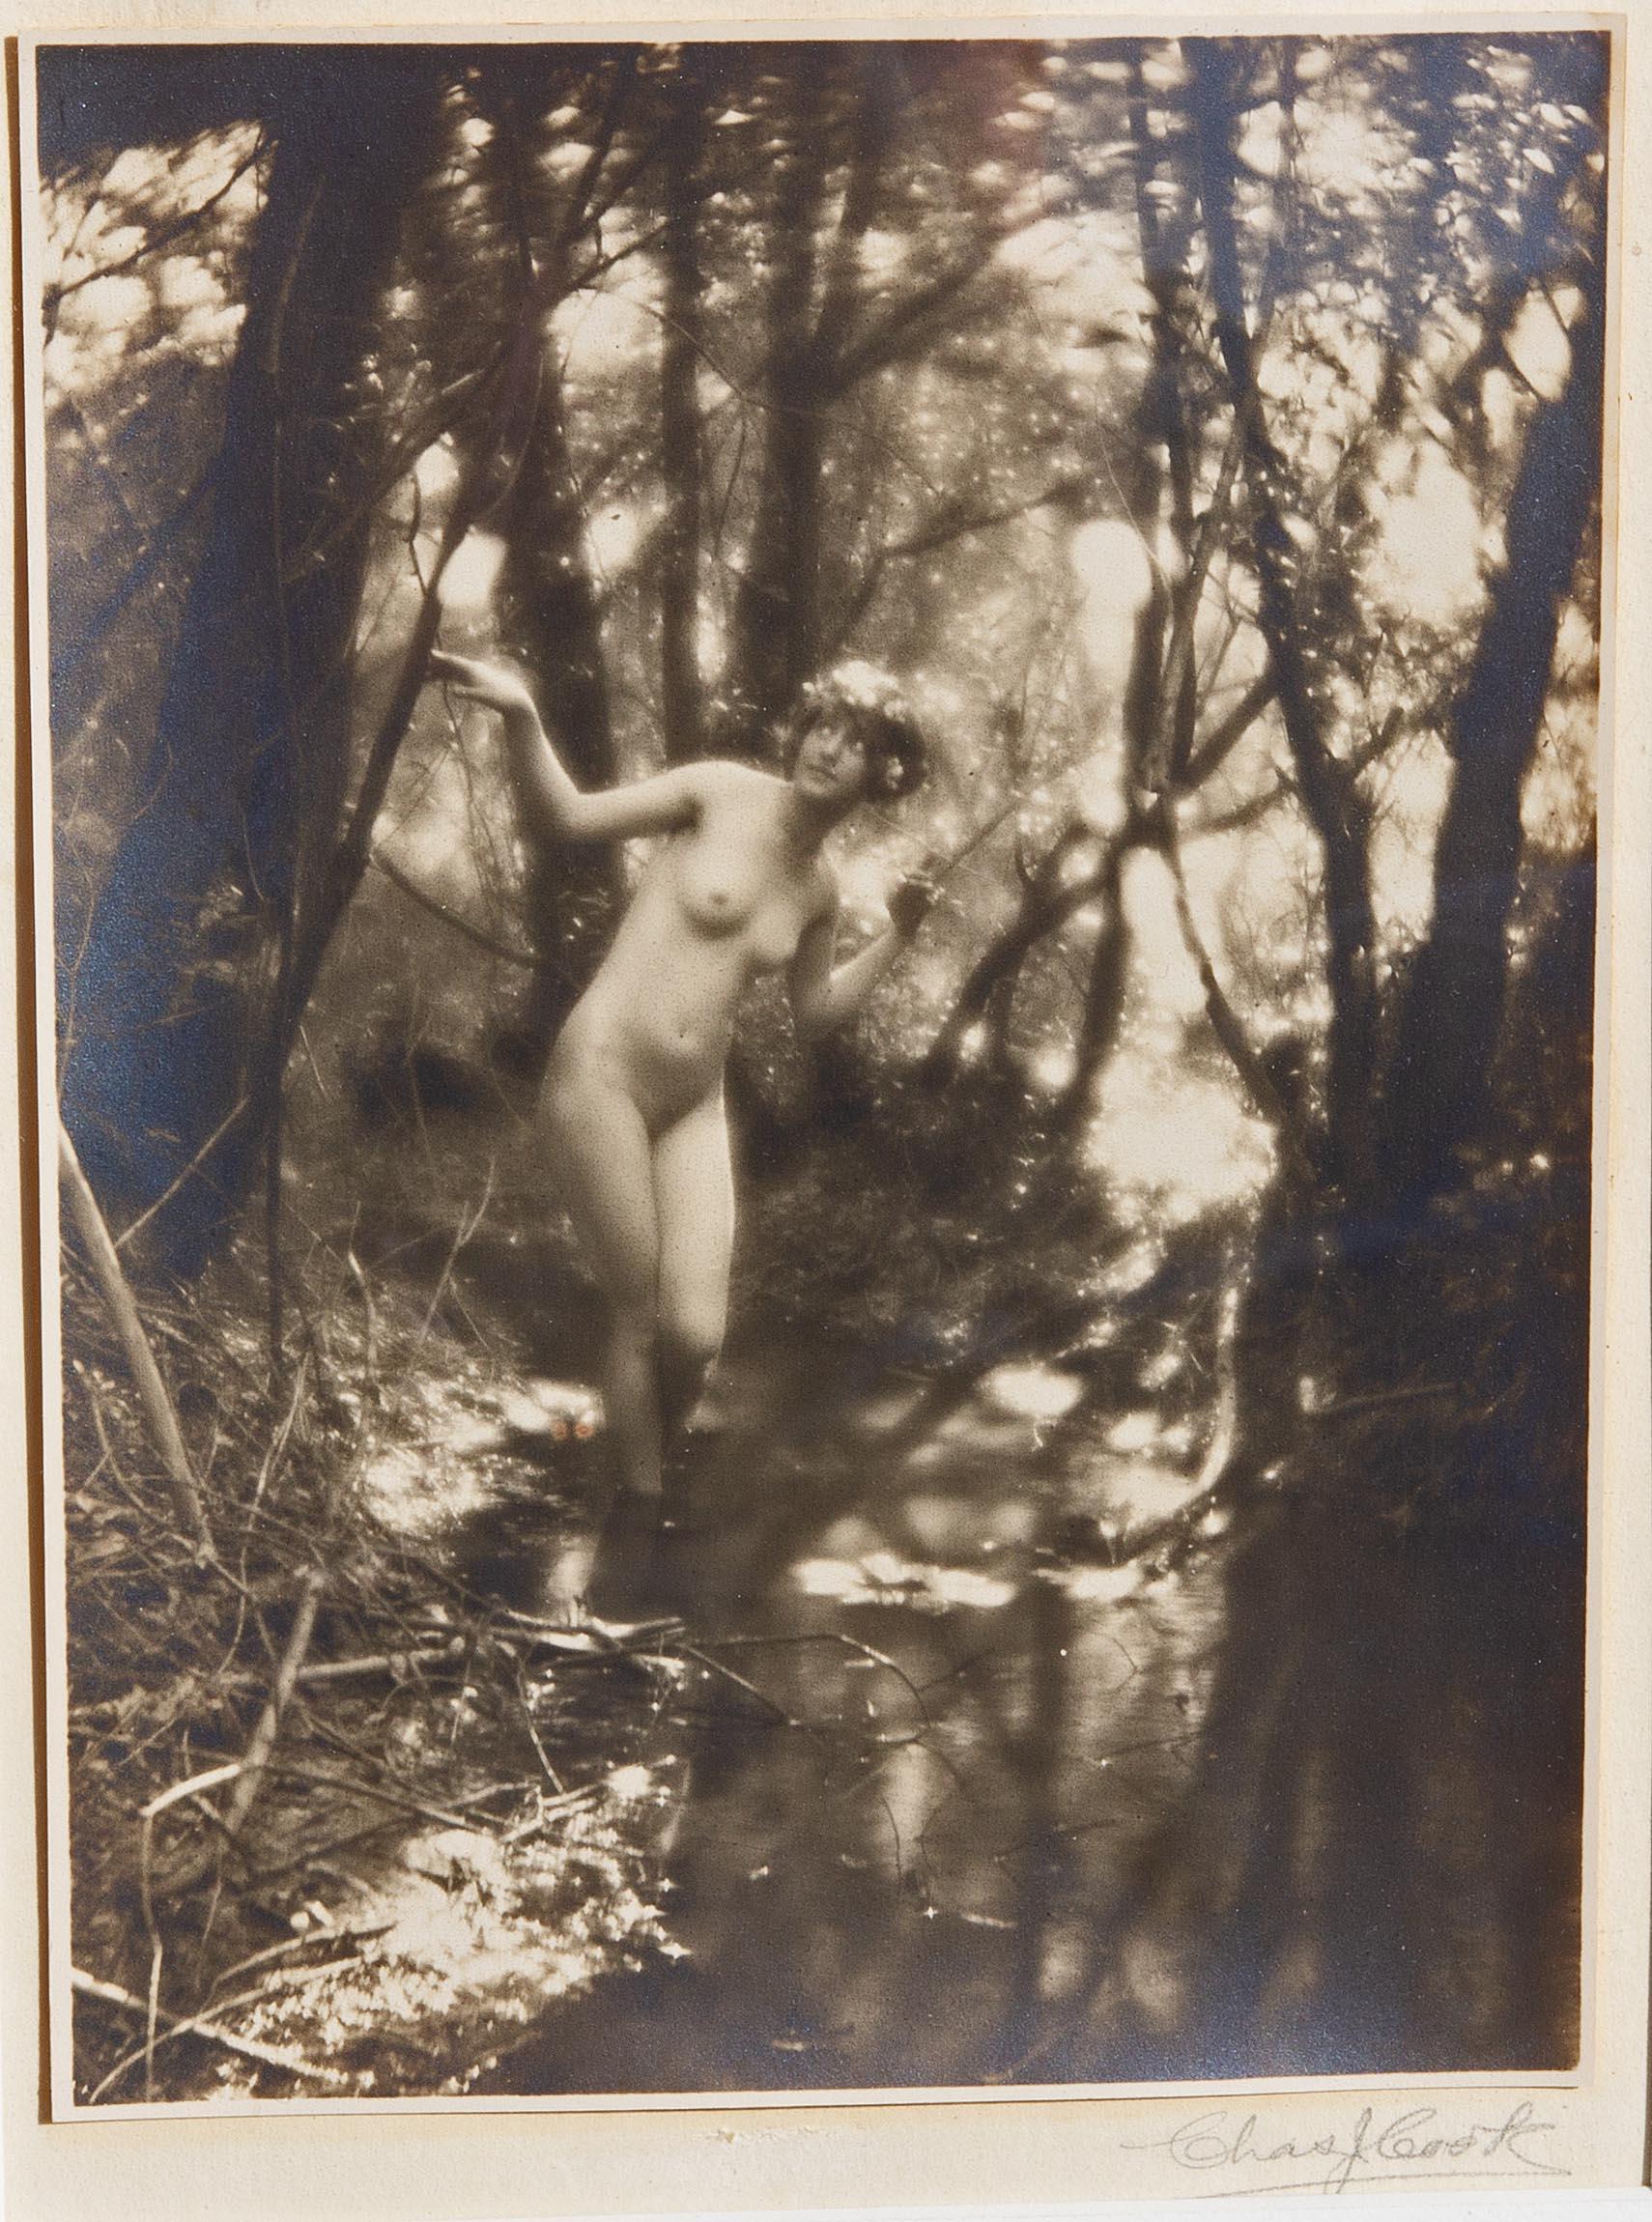 Pictorialist photograph of nude woman in a forest interior by Charles Cook. Silver print. Um 1910.

Charles J. Cook was a painter and photographer who specialized in nudes. He was a resident of Chicago’s Tree Studios building between at least 1908